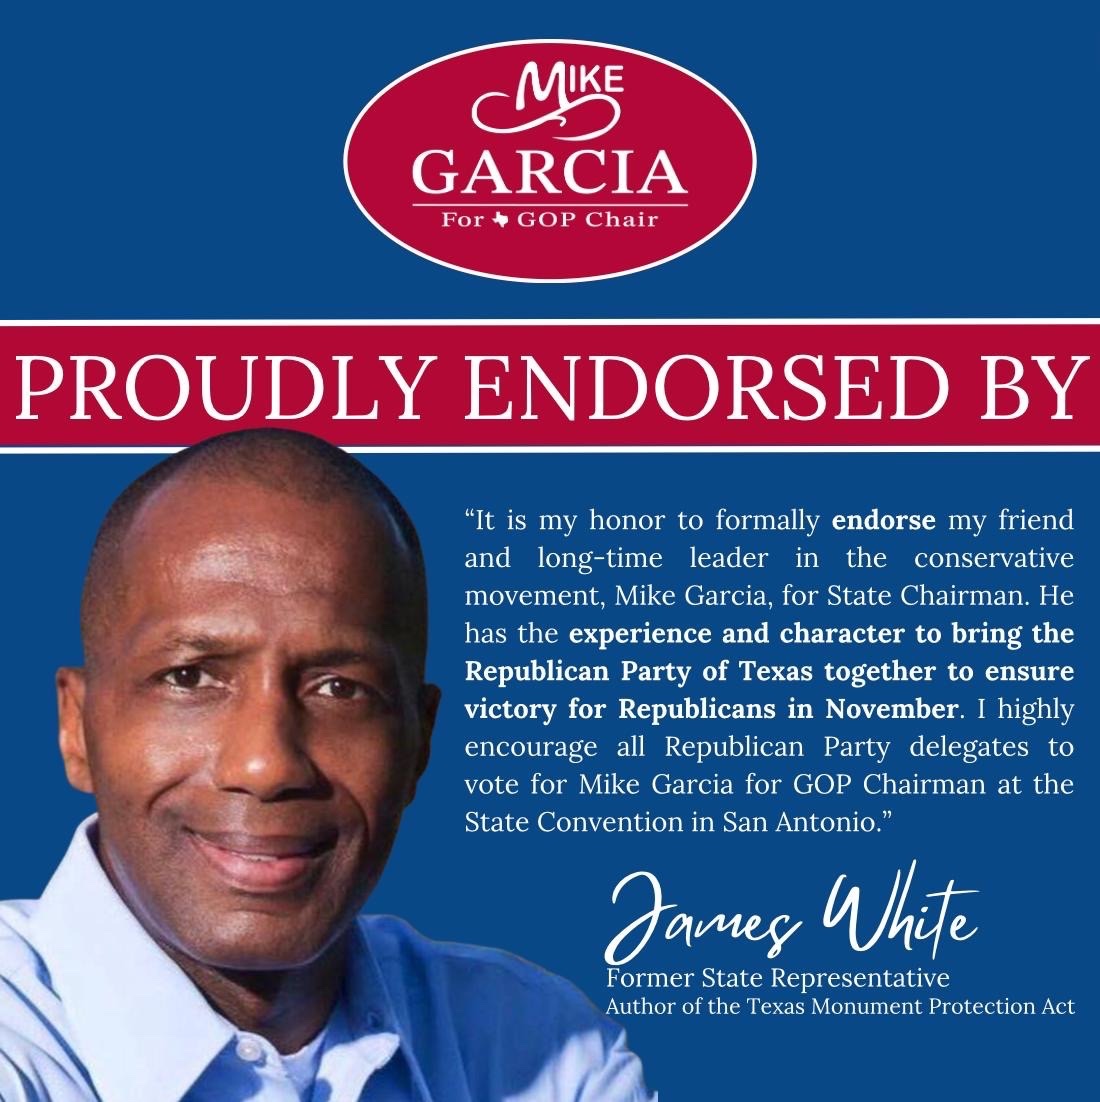 Happy to announce Fmr. State Rep. James White’s endorsement of our campaign! Rep. White represented East Texas for over a decade in the #txlege. Got to know and work with him after he joined the @TxFreedomCaucus when I was director. He’s a man of God and loves our state and party…